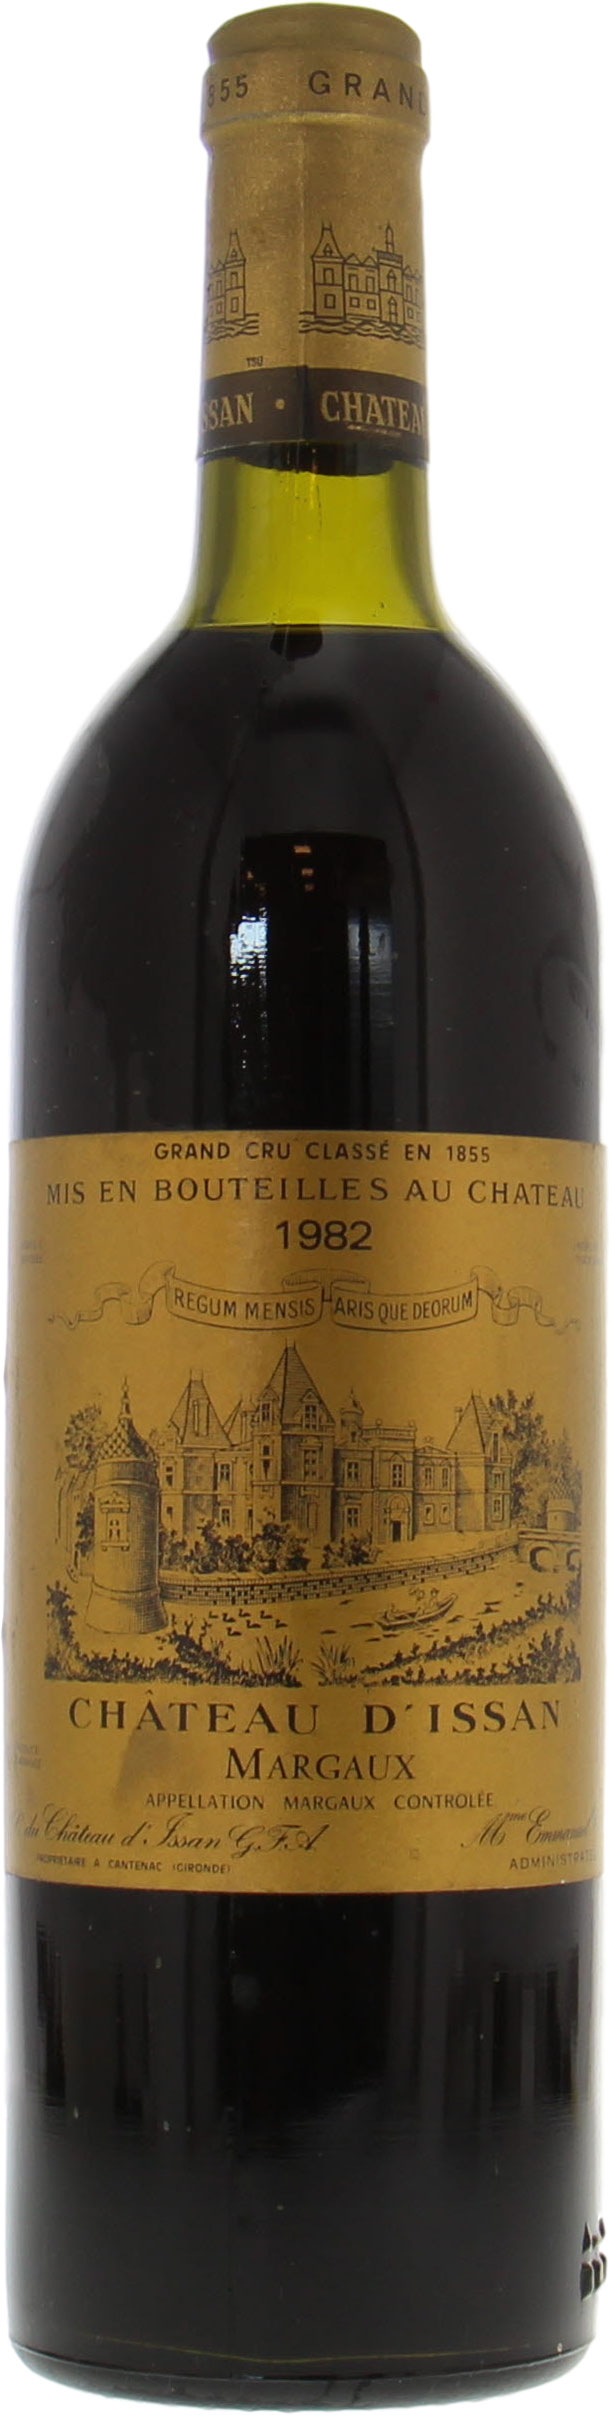 Chateau D'Issan - Chateau D'Issan 1982 Top Shoulder